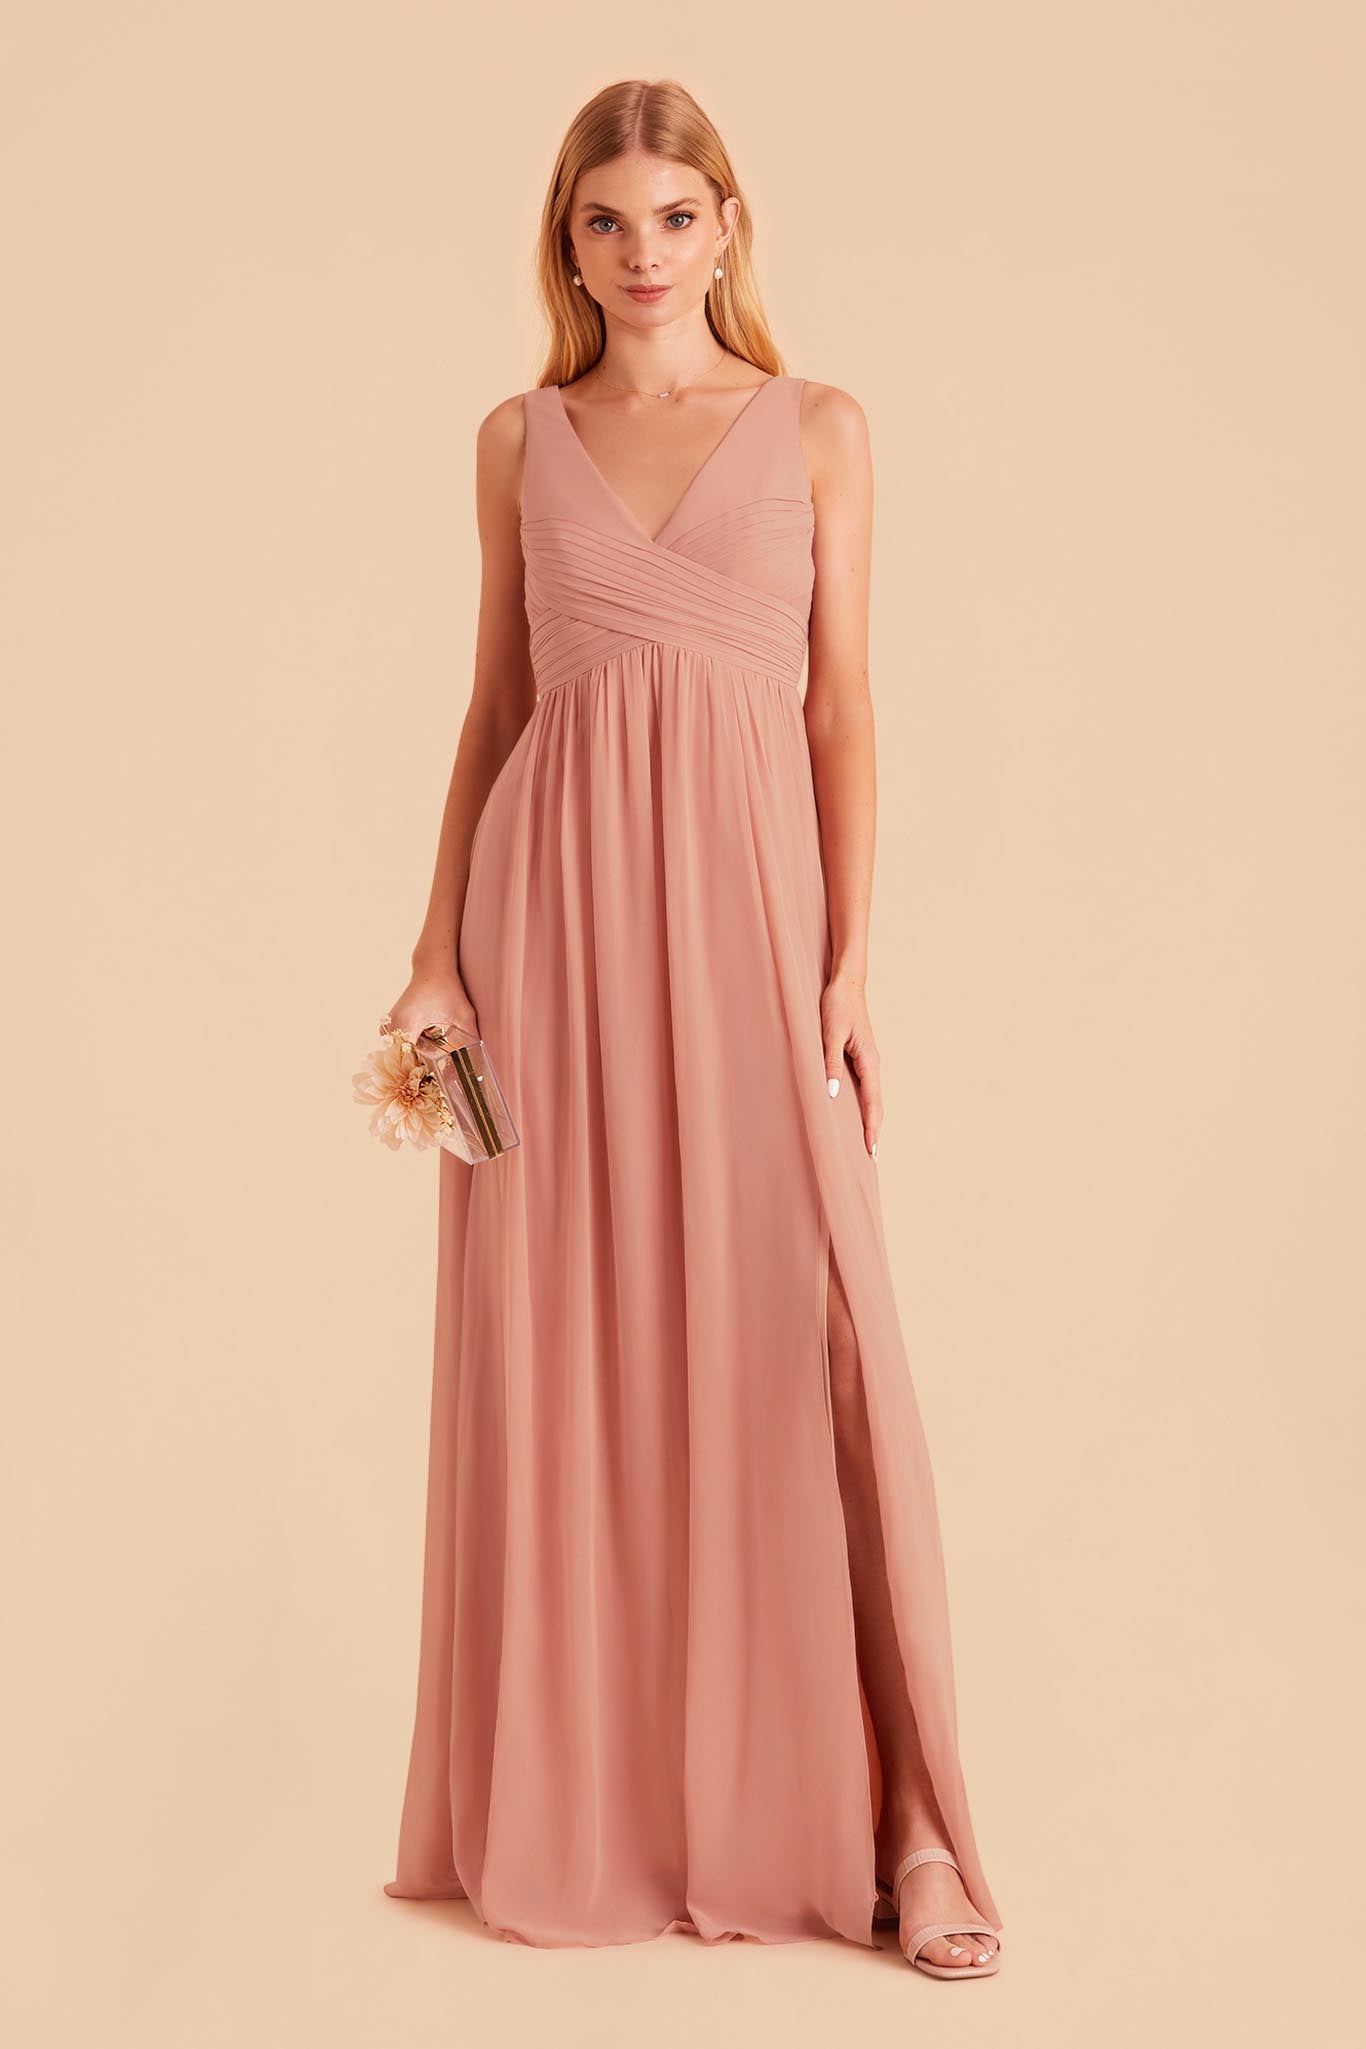 Dusty Rose Laurie Empire Dress by Birdy Grey